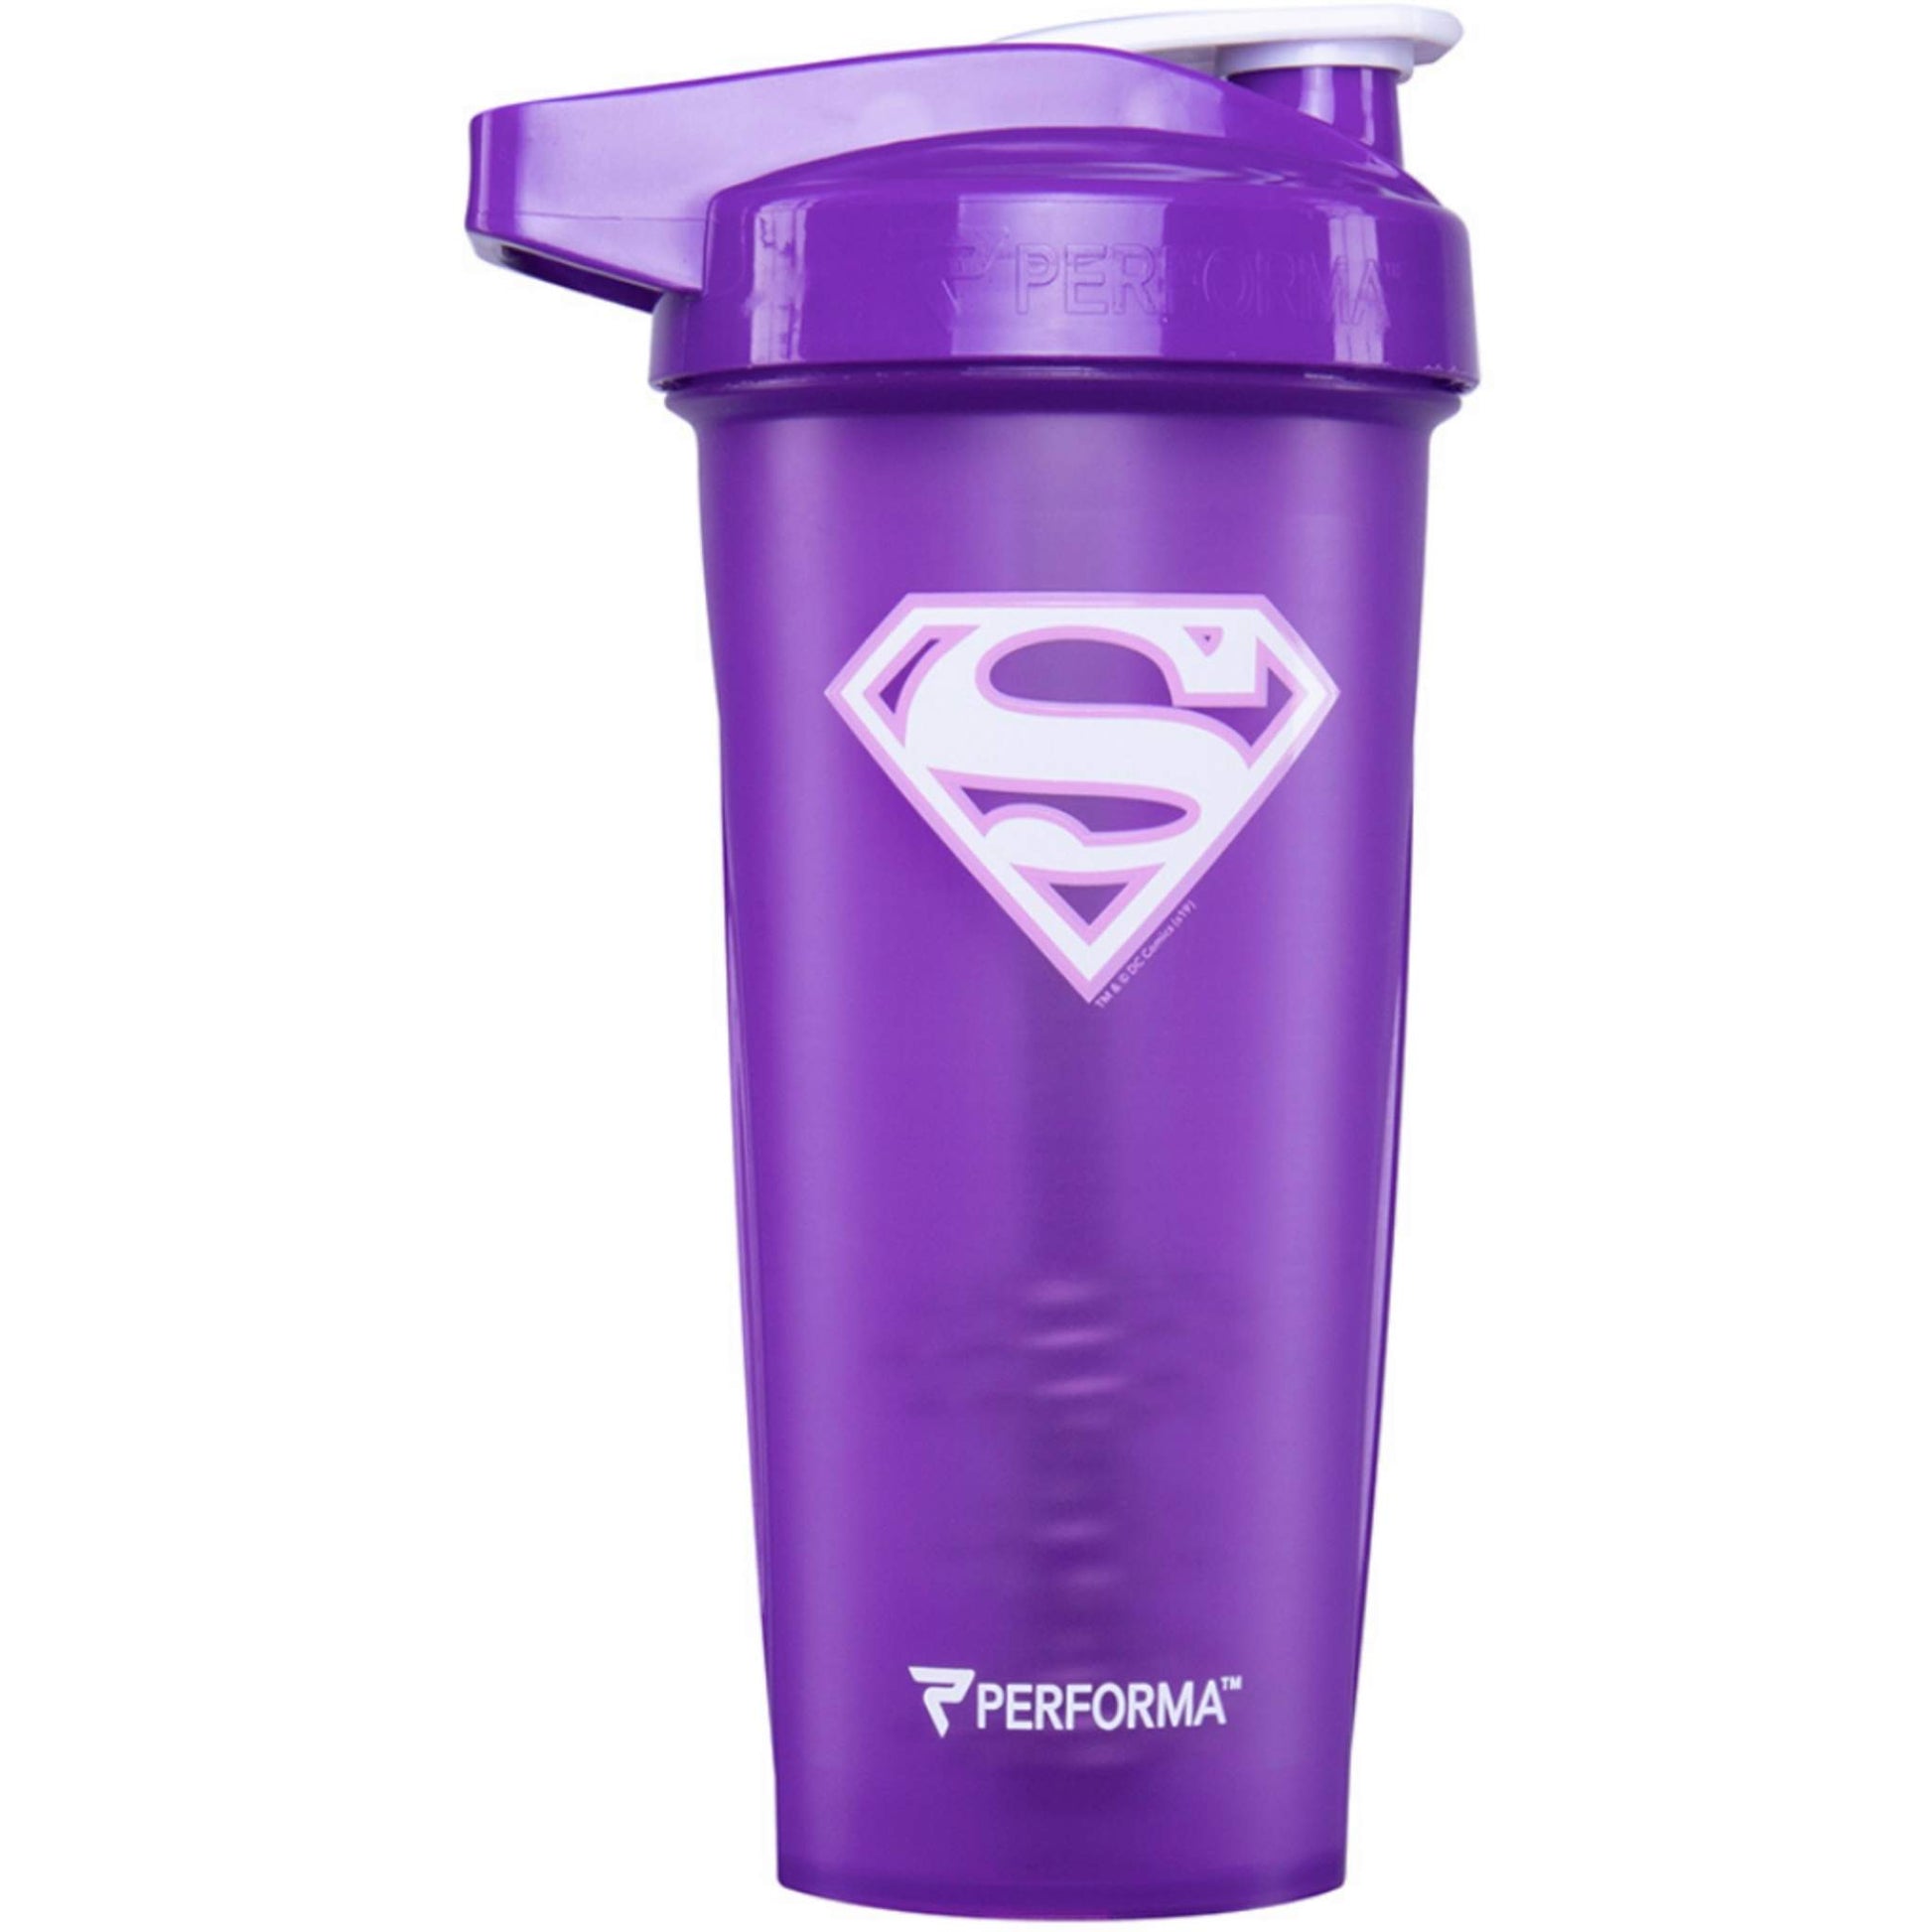 Performa - ACTIV Shaker Cup, 28oz, Supergirl, Team Perfect